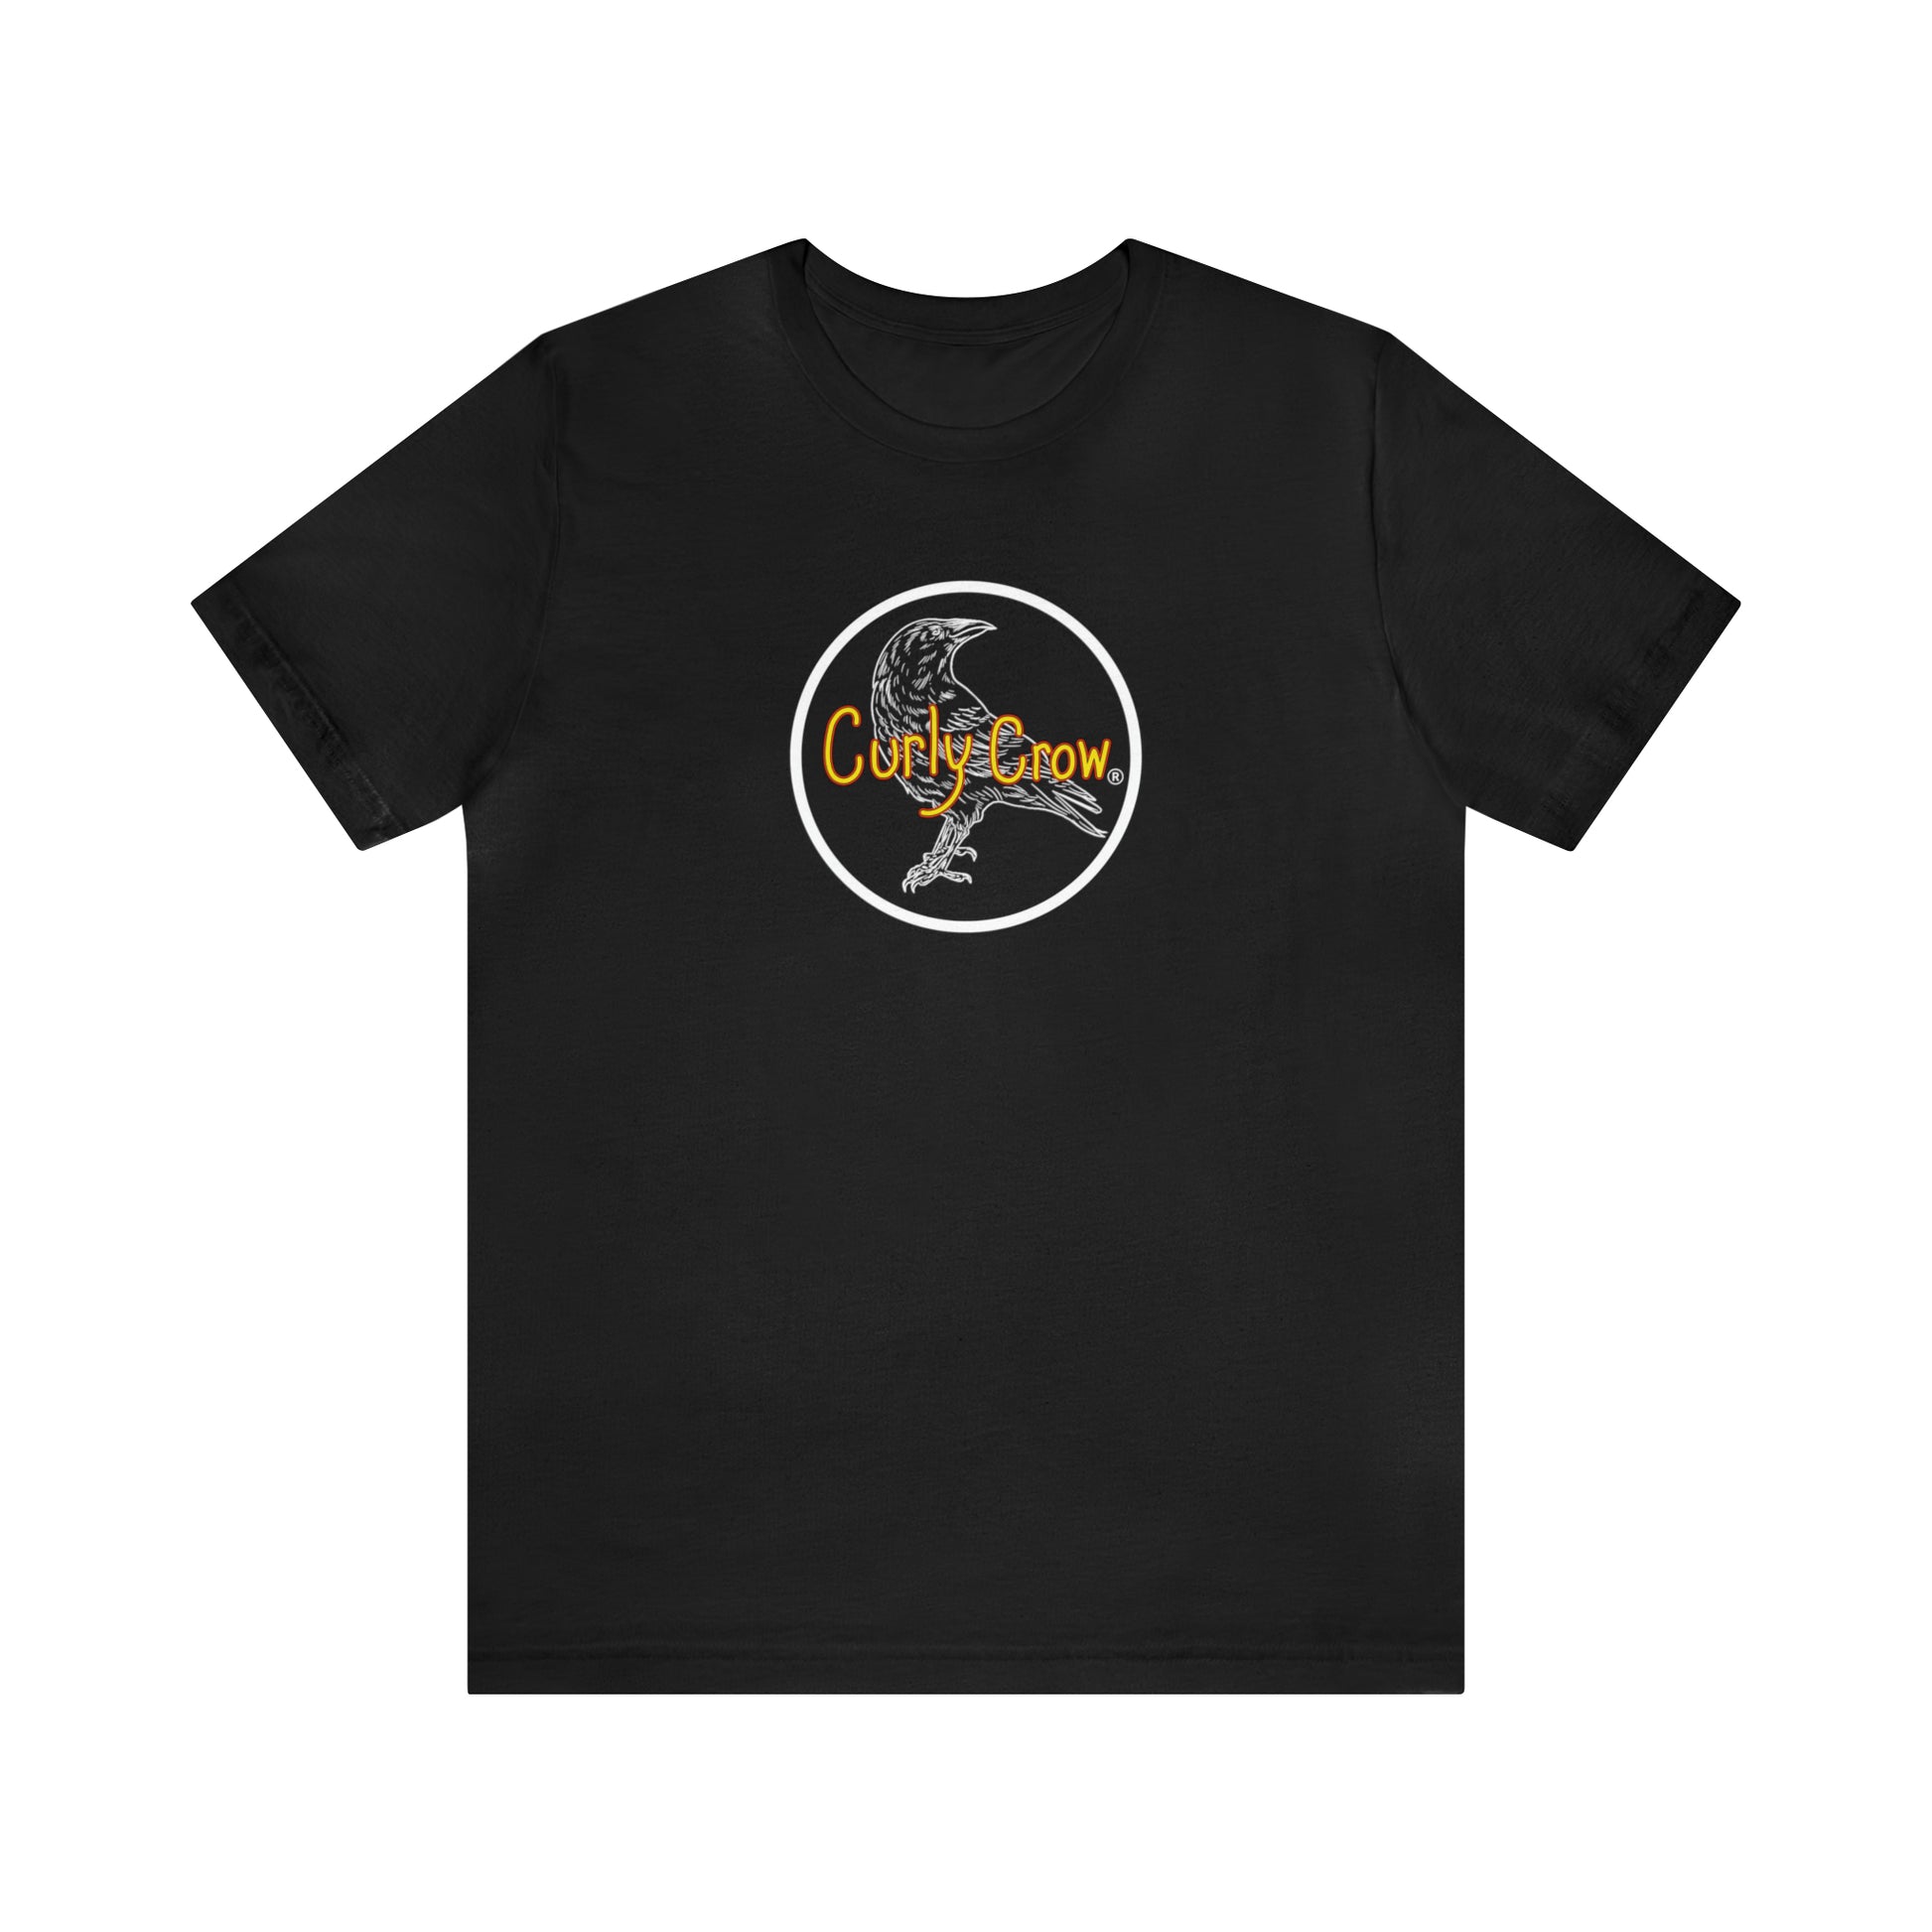 Curly Crow Black Crow Official T-Shirt with Trademark company brand logo